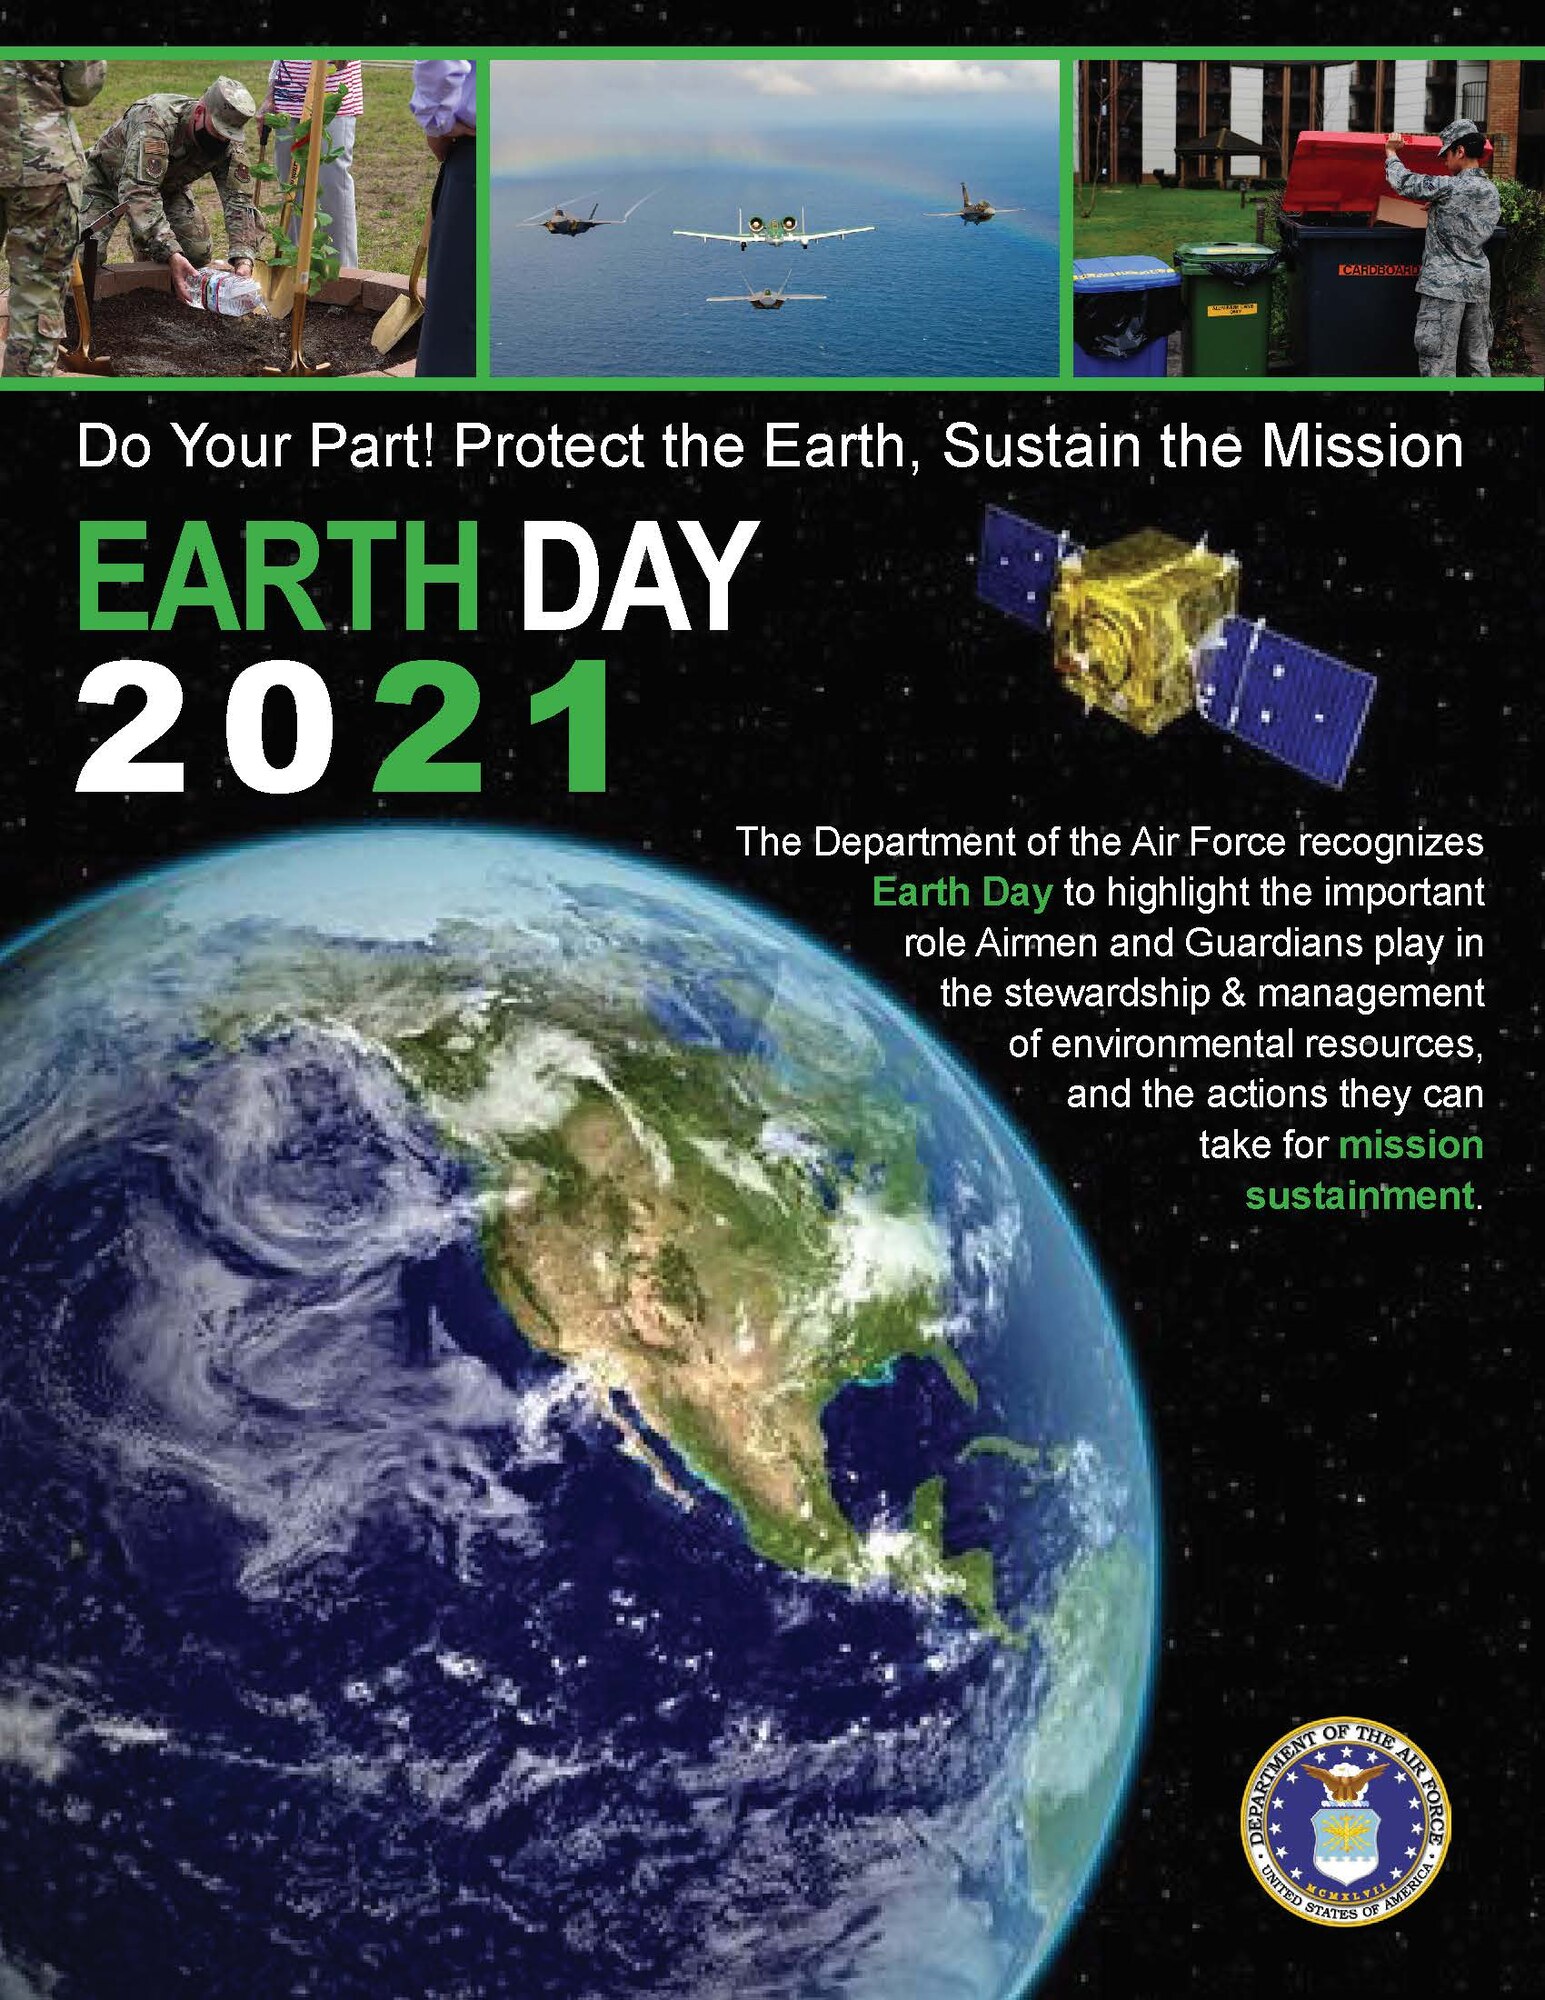 DAF Earth Day Poster 2021